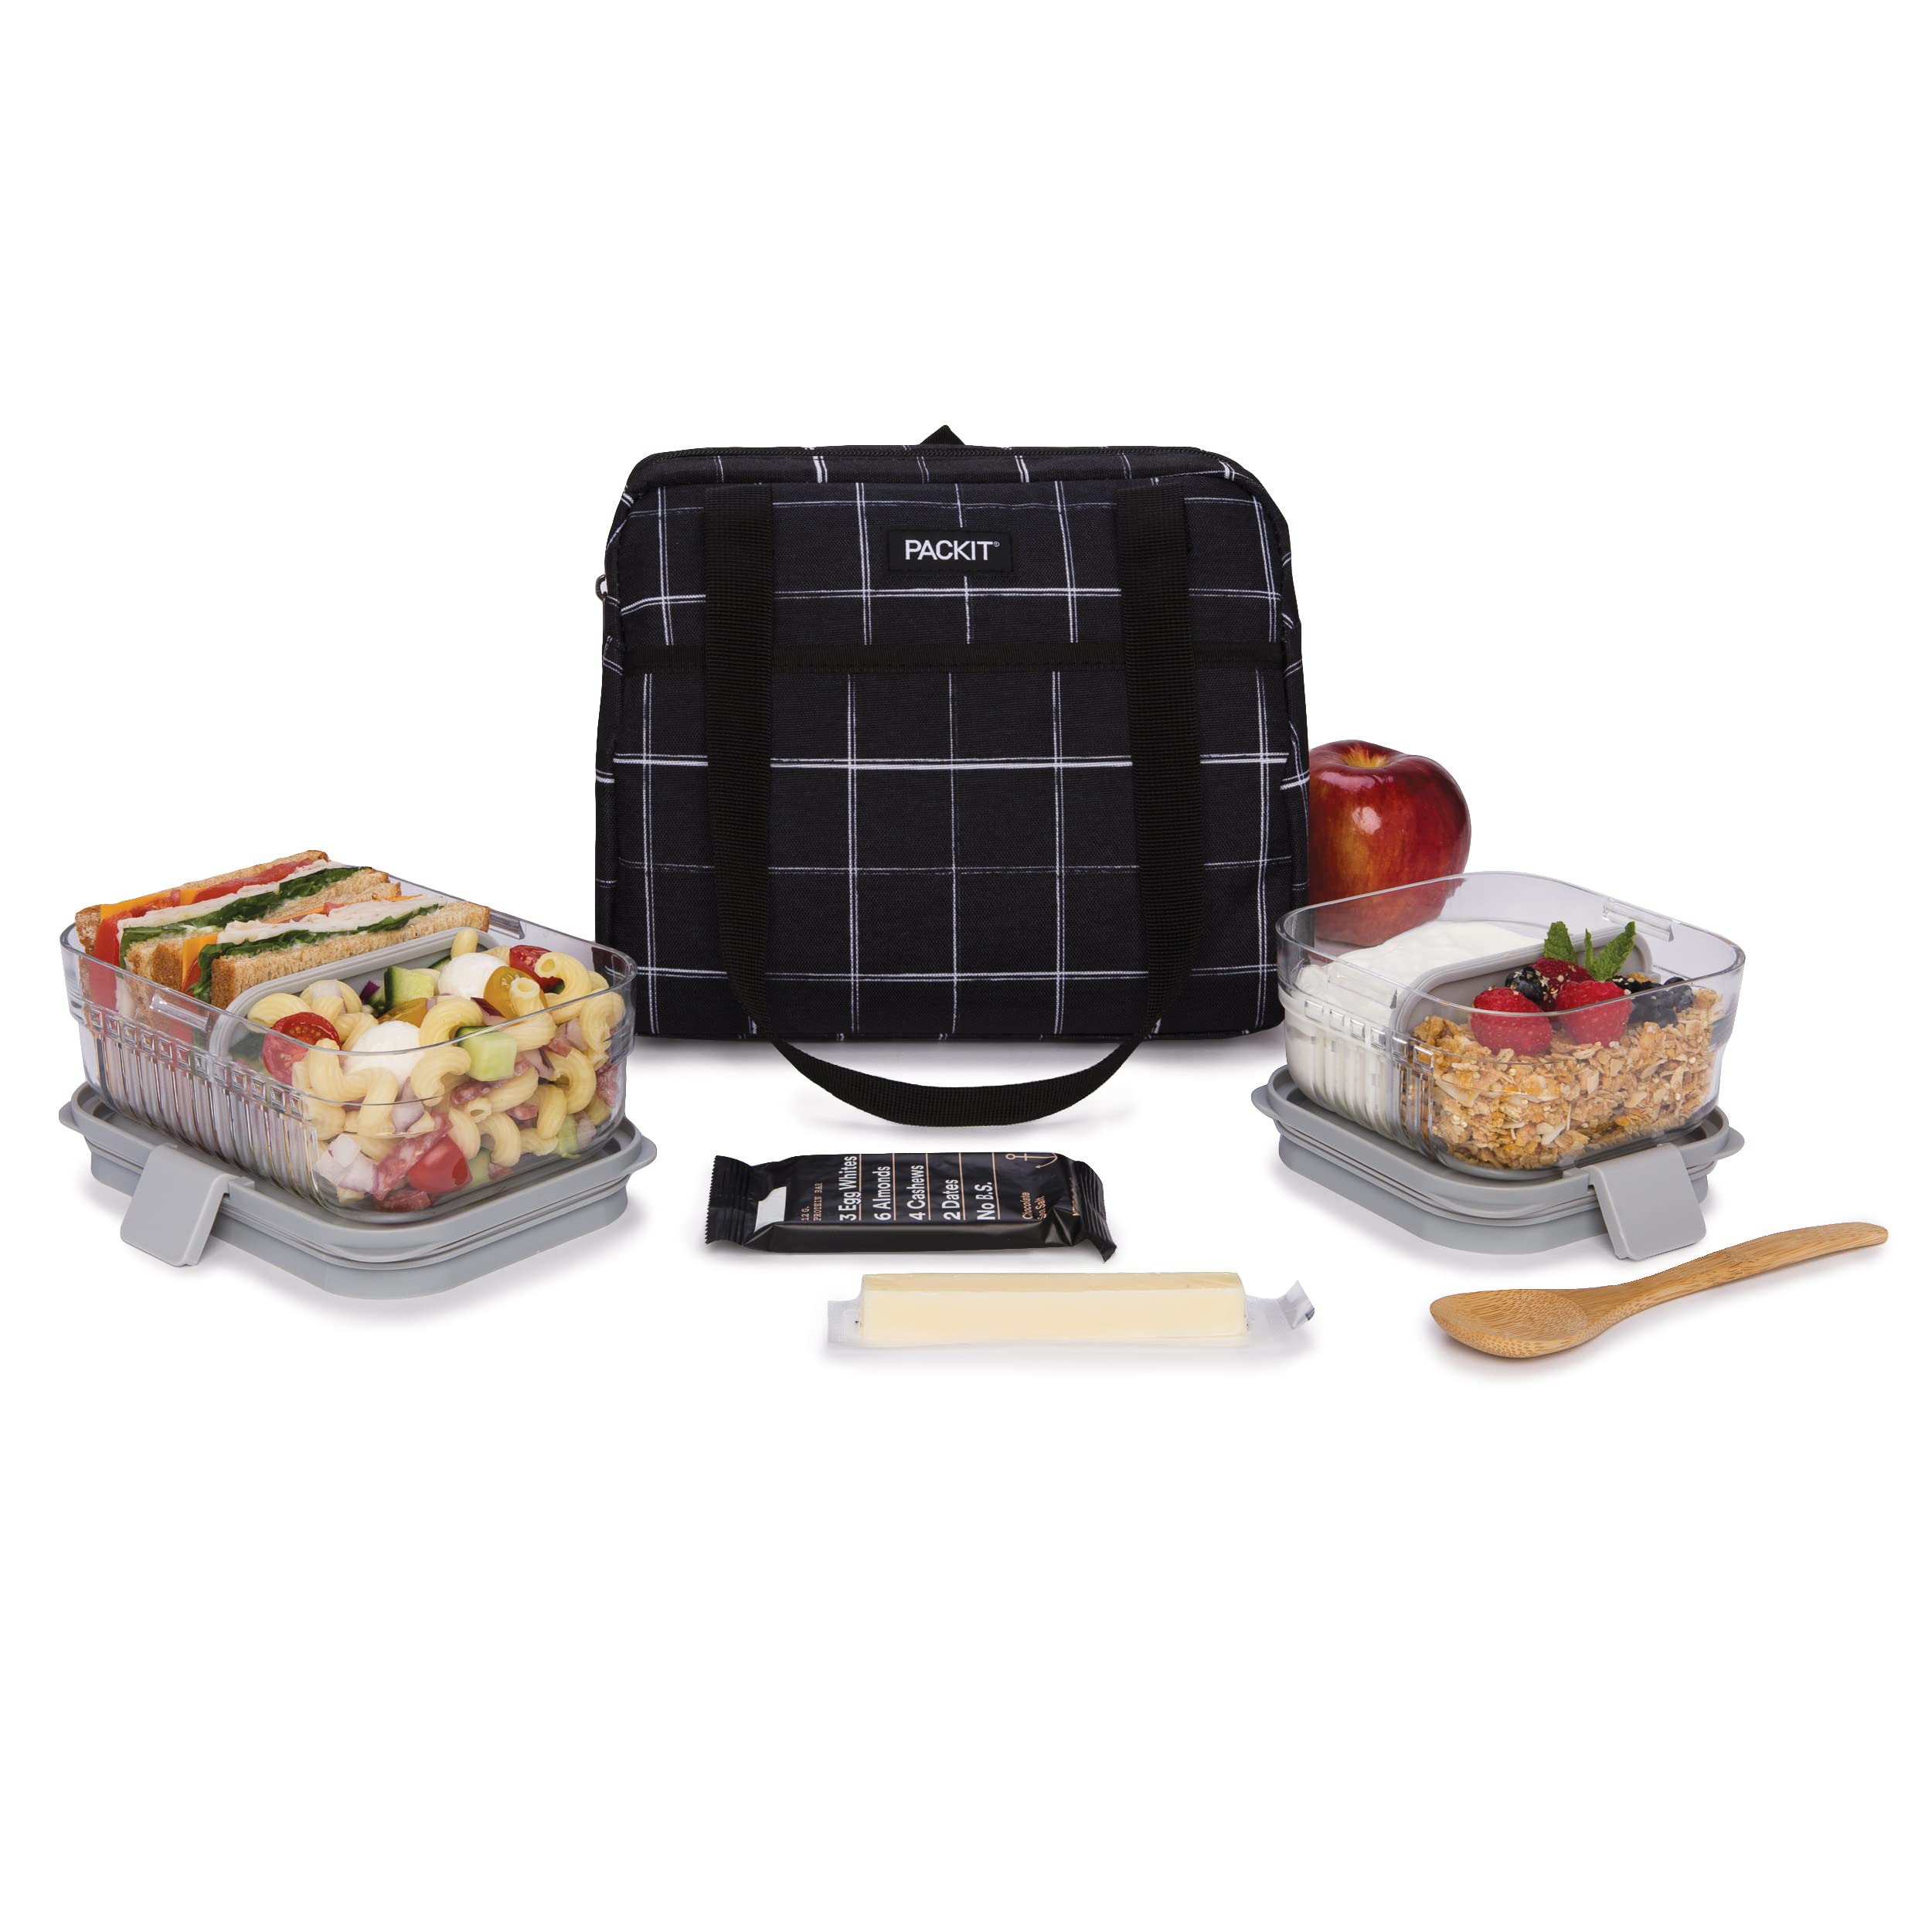 PackIt Freezable Hampton Lunch Bag, Black Grid, Built with EcoFreeze Technology, Collapsible, Reusable, Zip Closure with Front Pocket and Shoulder Straps, Perfect for Tweens and Adults